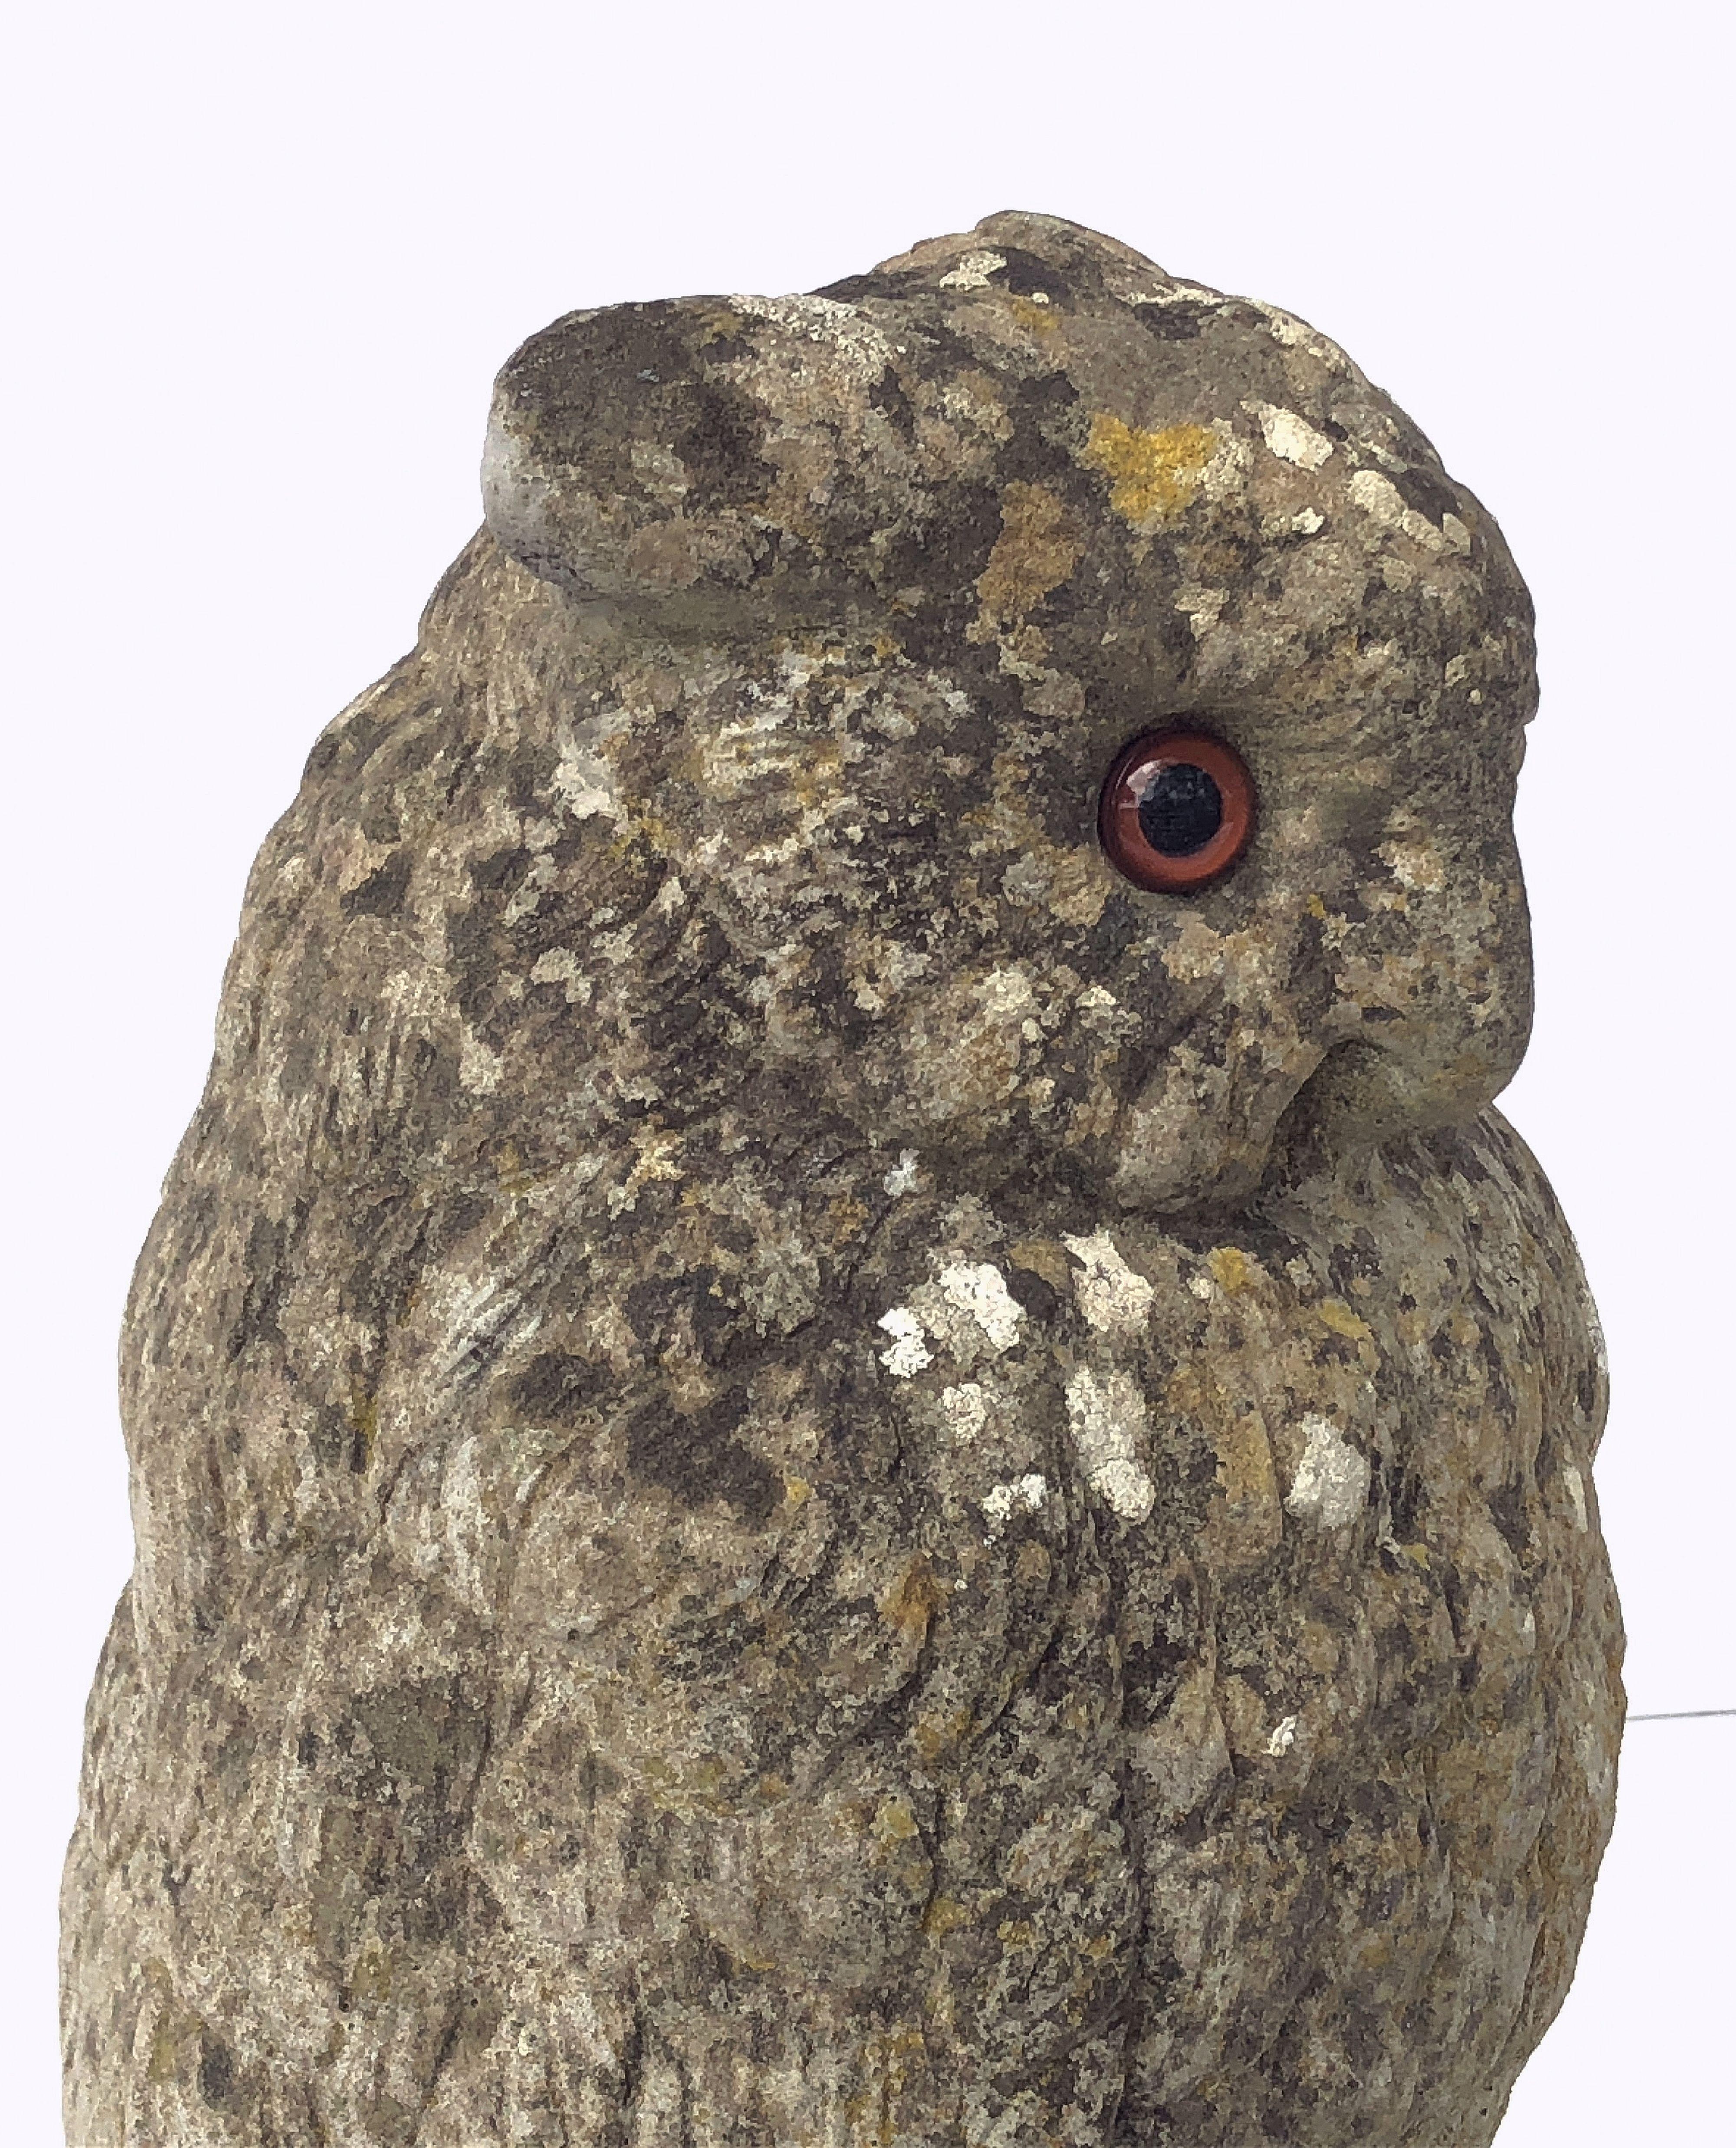 Large English Garden Stone Owl Statues with Glass Eyes 'Individually Priced' 6